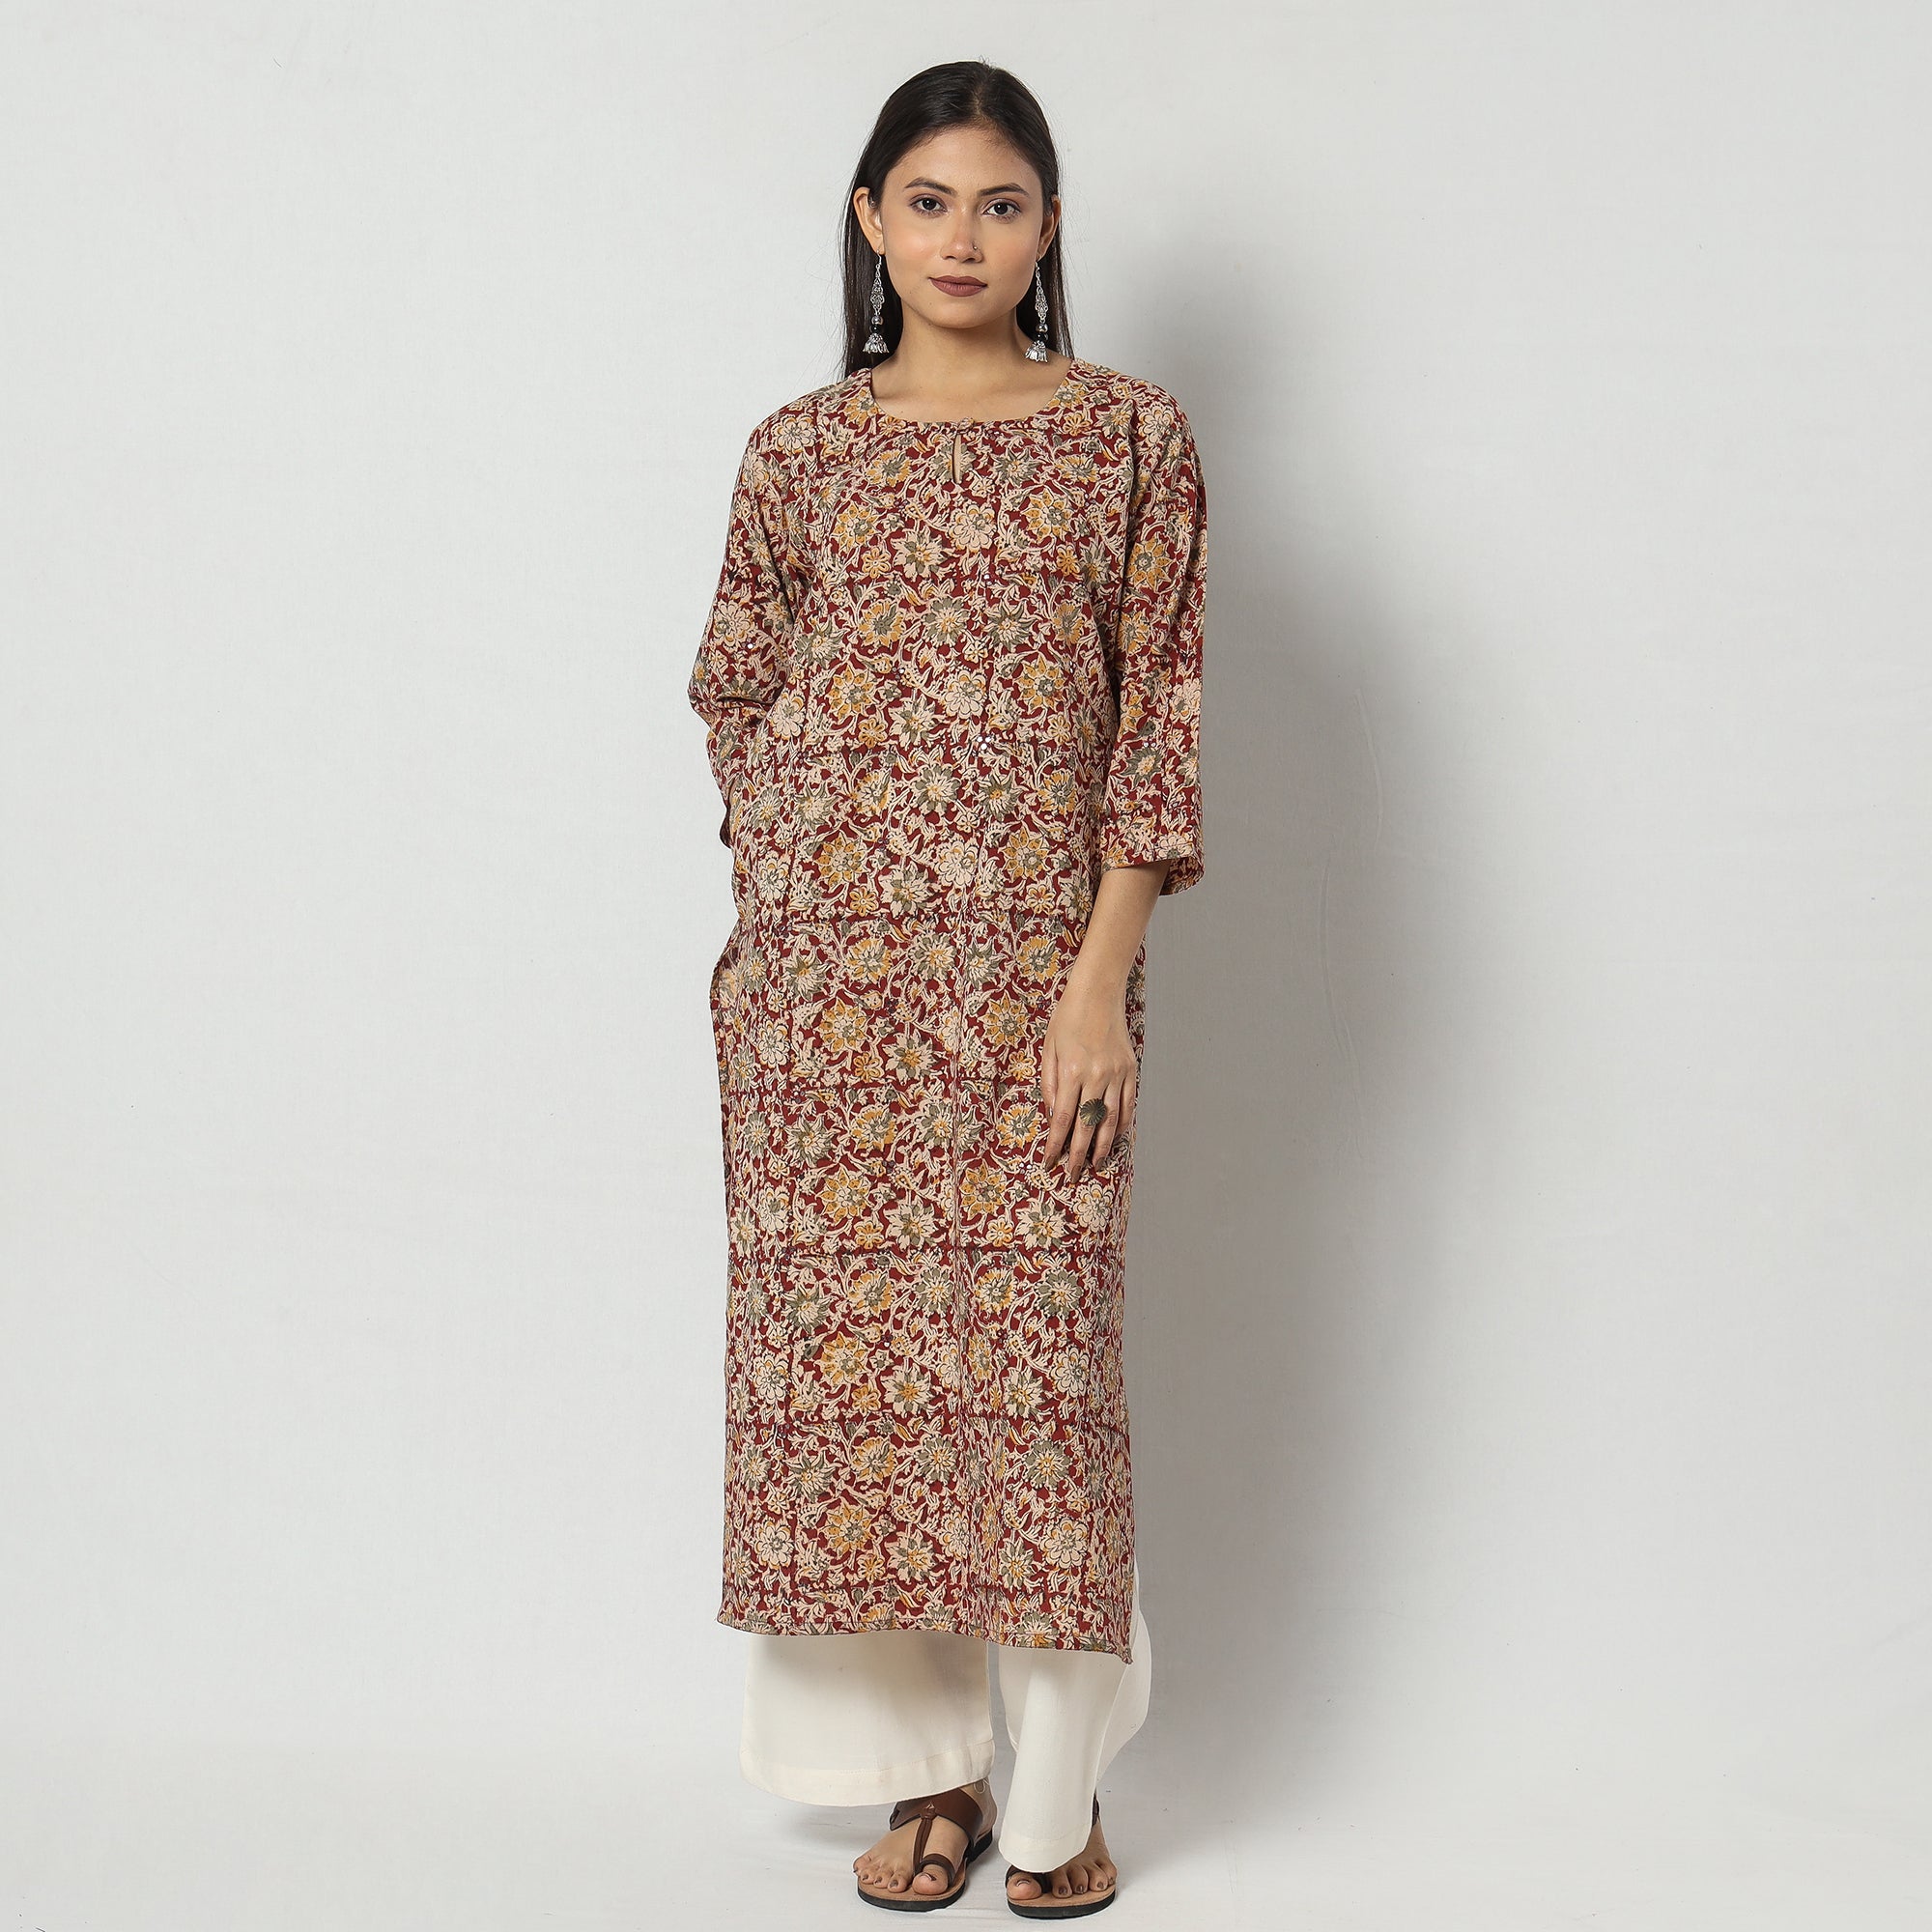 Corporate Blue Pure Kalamkari Floral Printed With Embroidery Cotton Kurta  for online shopping- PKK1951